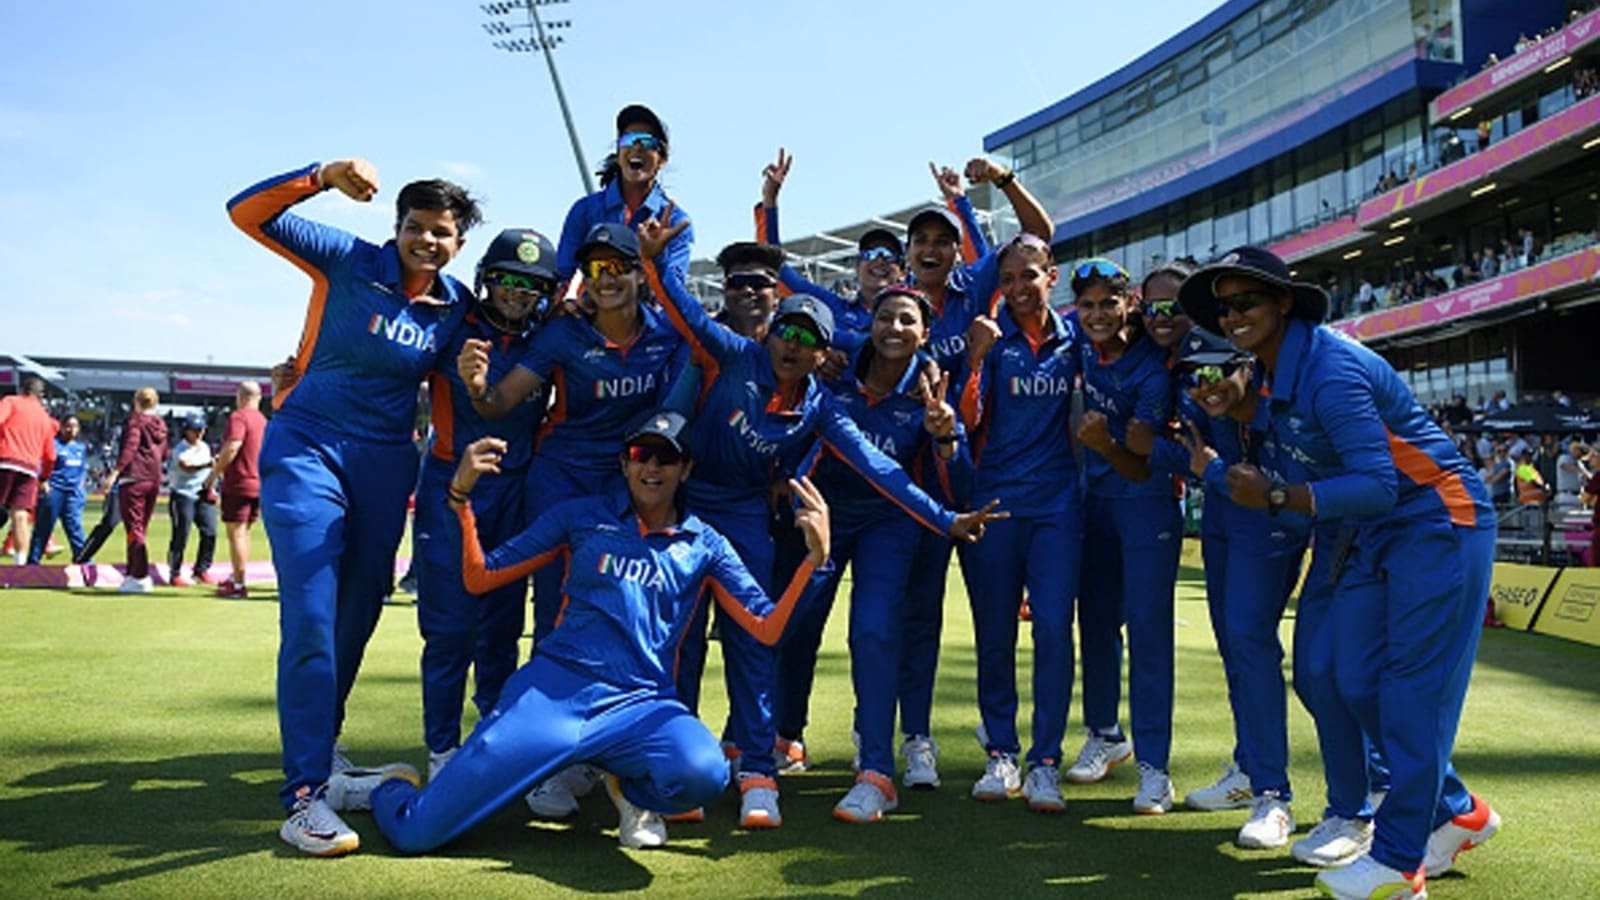 India women reach CWG 2022 cricket final, to play for gold after